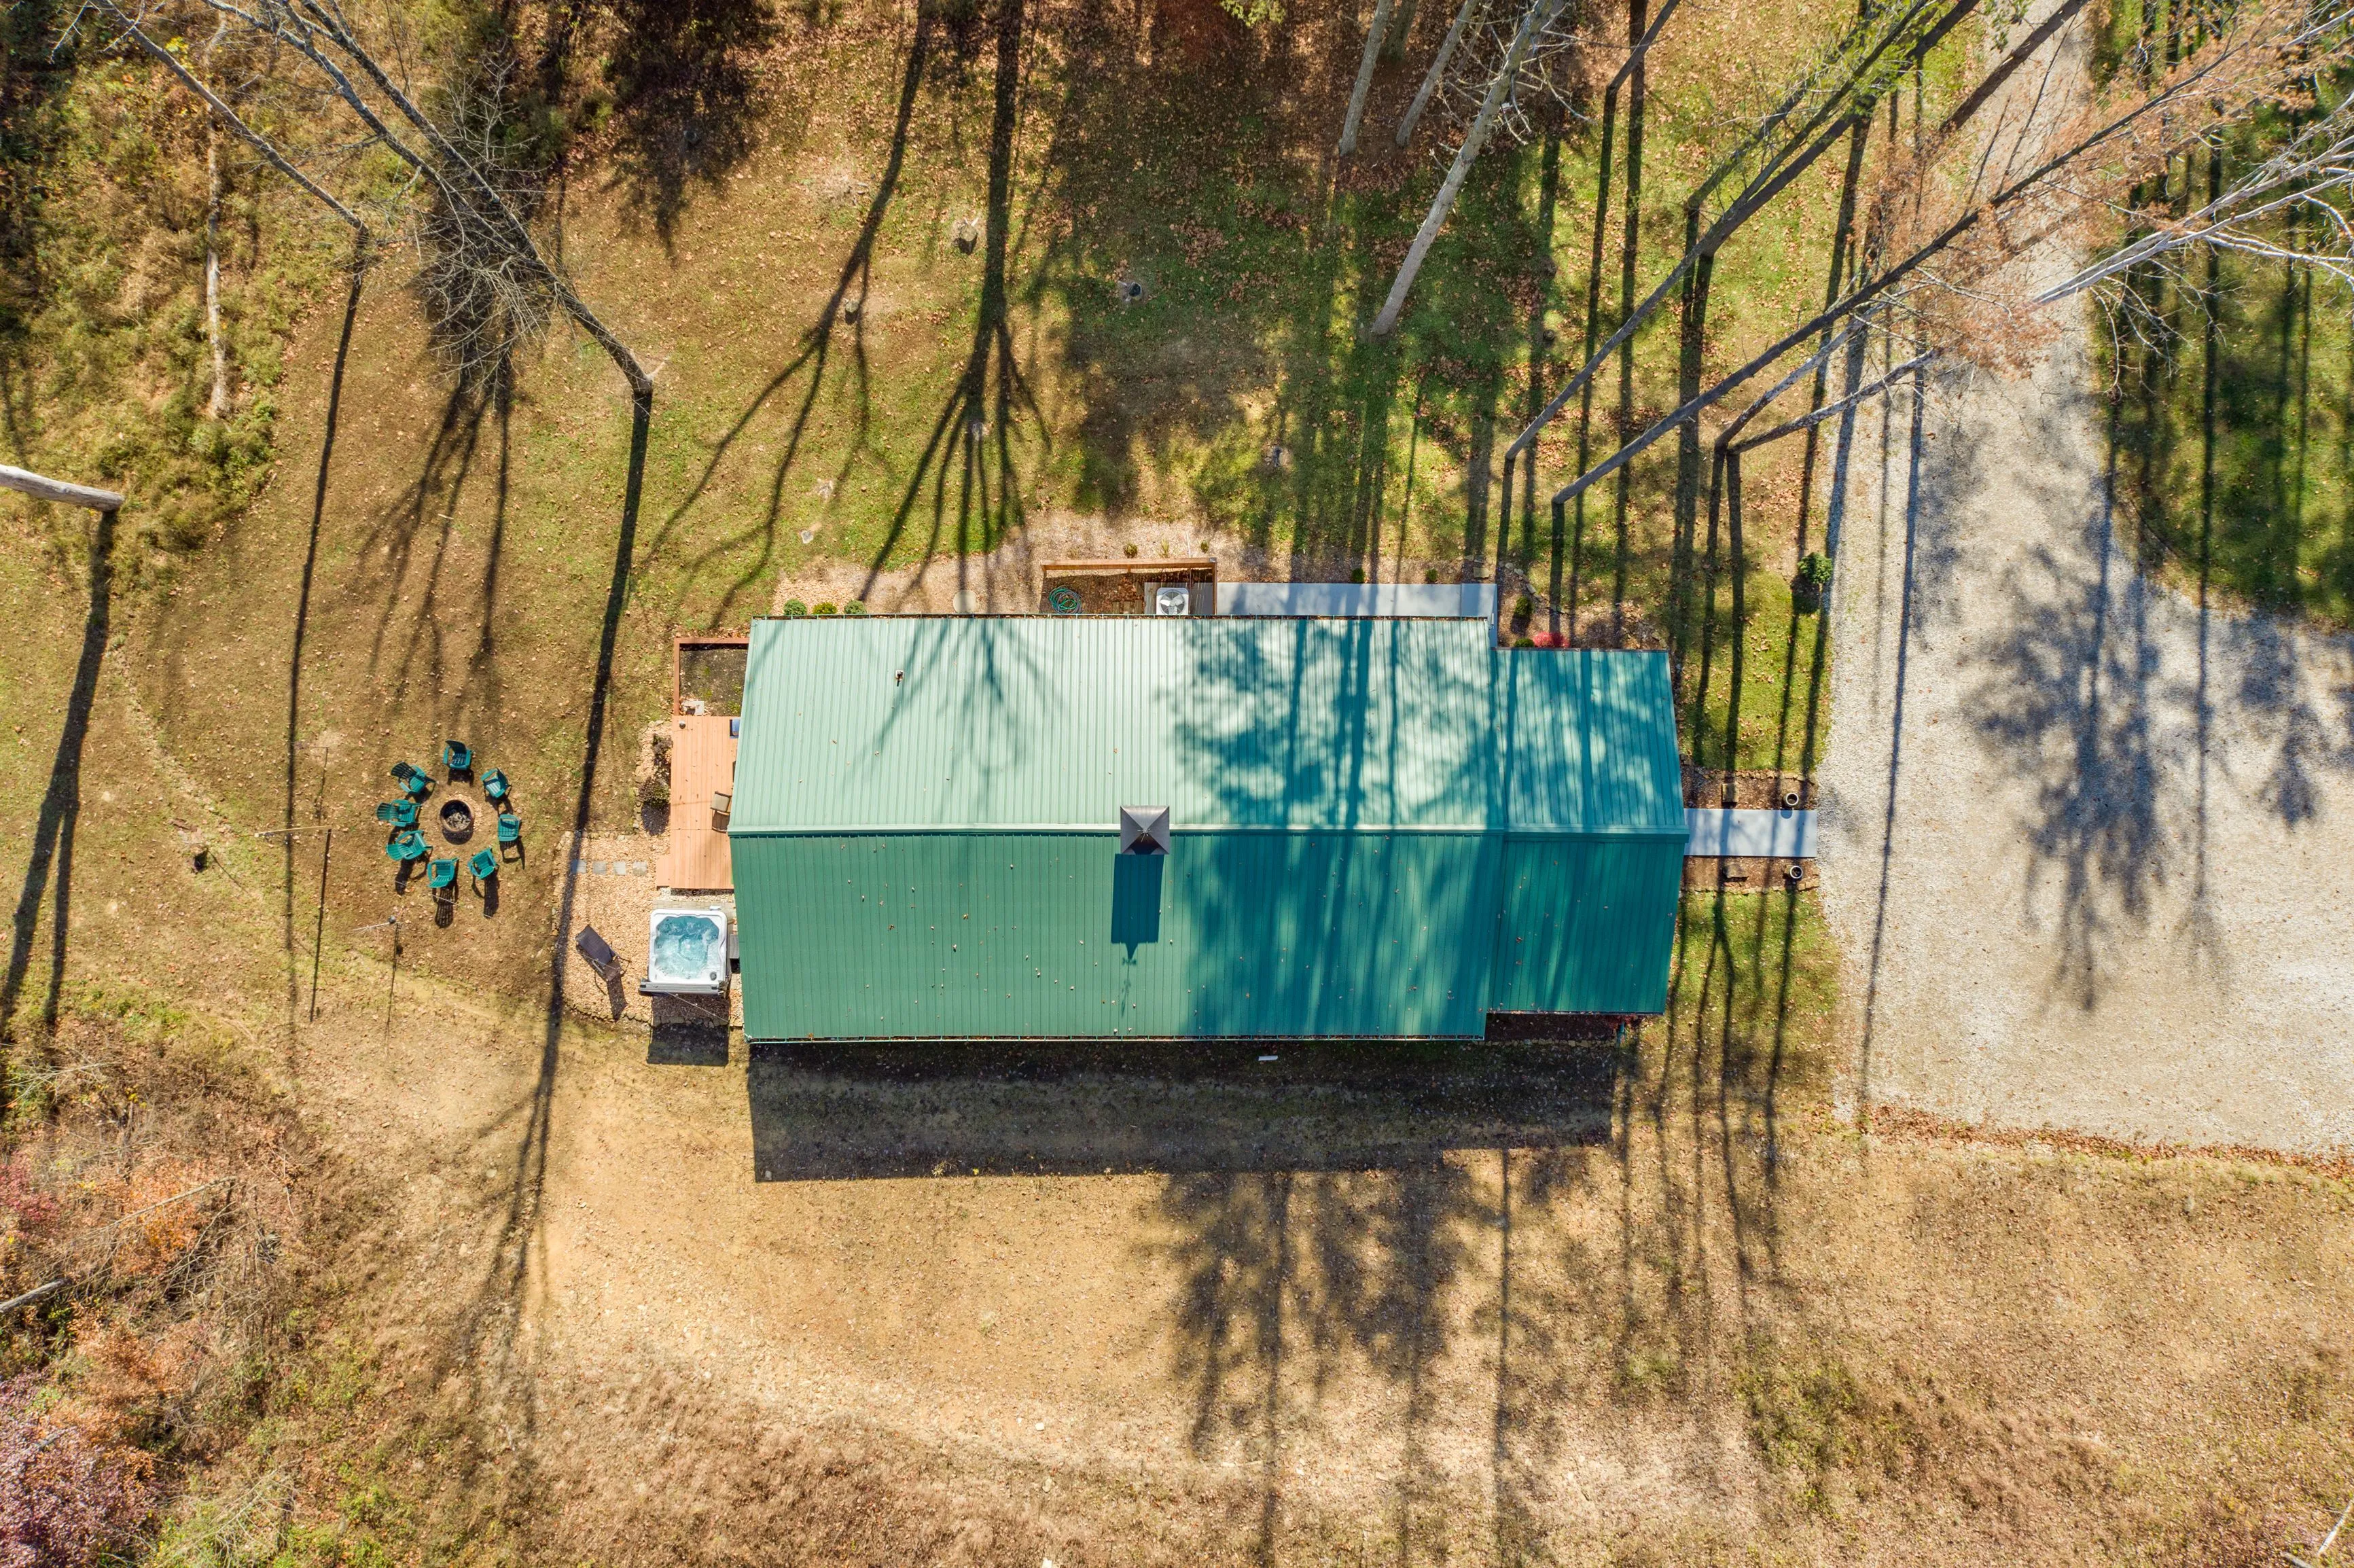 Aerial view of a green-roofed house with an adjacent hot tub and patio furniture surrounded by tall trees casting shadows on the ground.